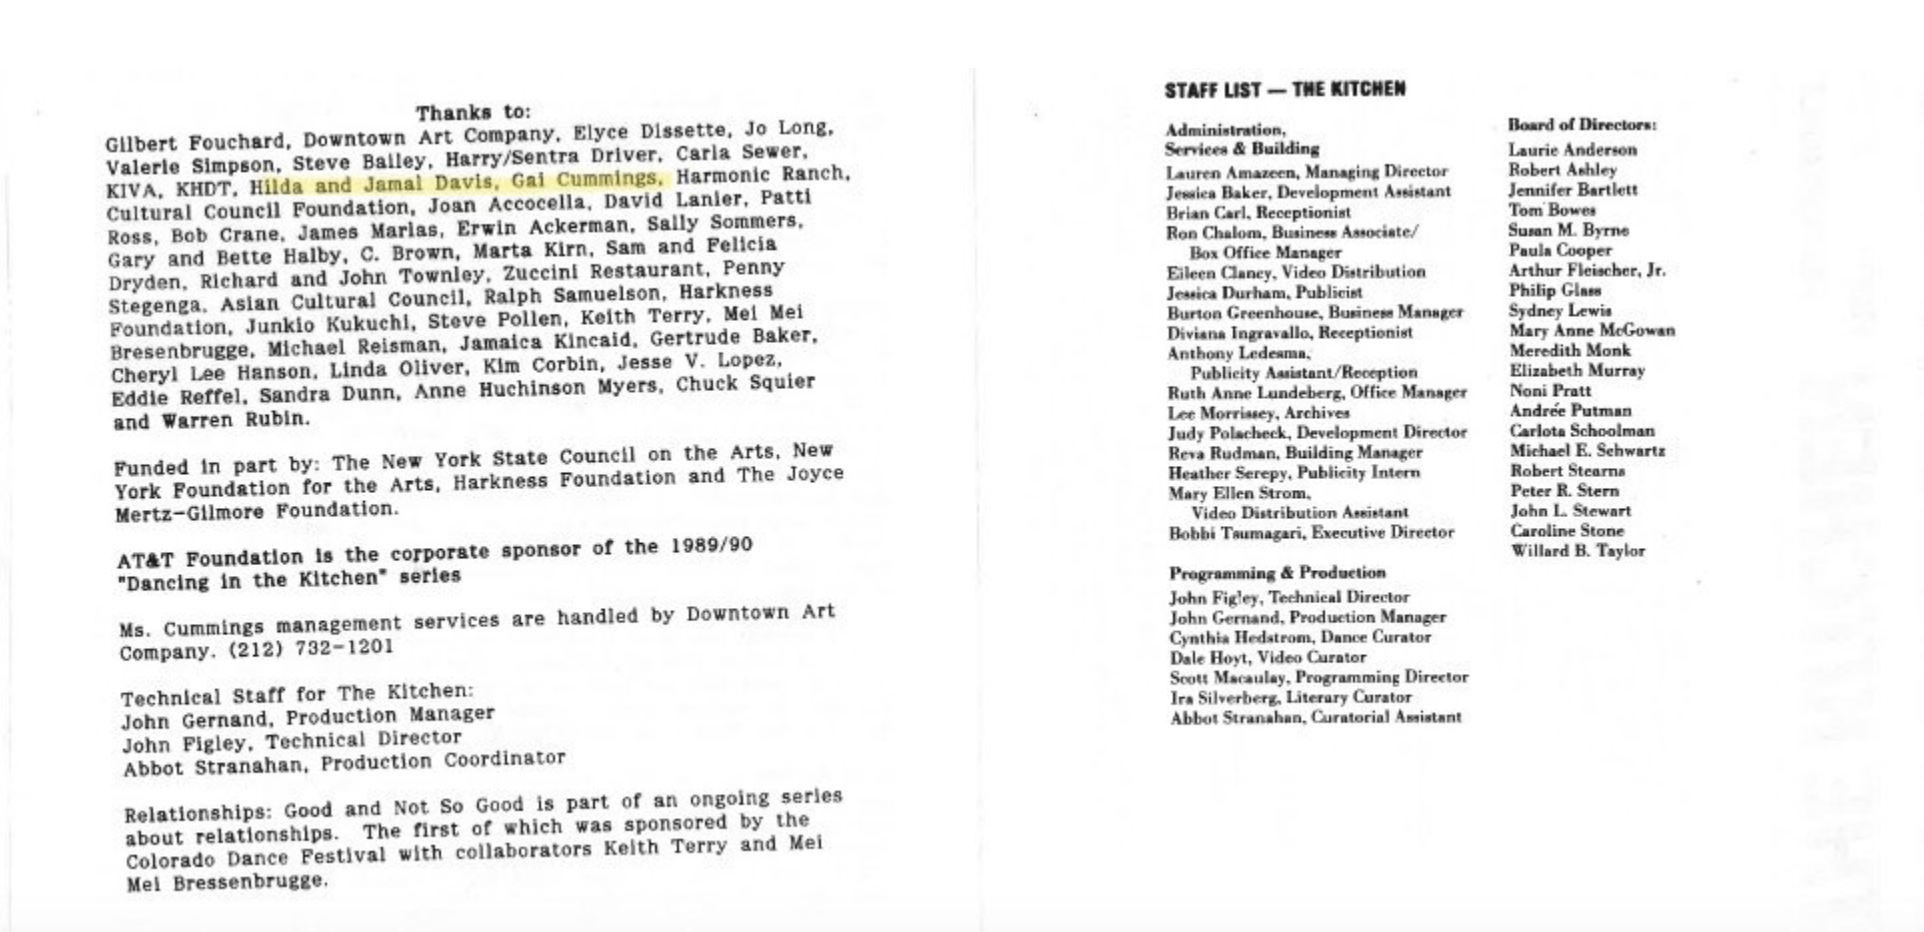 Excerpts from program for Blondell Cummings, Relationships: Good and Not So Good, For J.B., and 3B49 at The Kitchen, November 30–December 3, 1989, with names of Cummings’s family members highlighted in yellow in the “Thanks to” section. Emphasis added. 